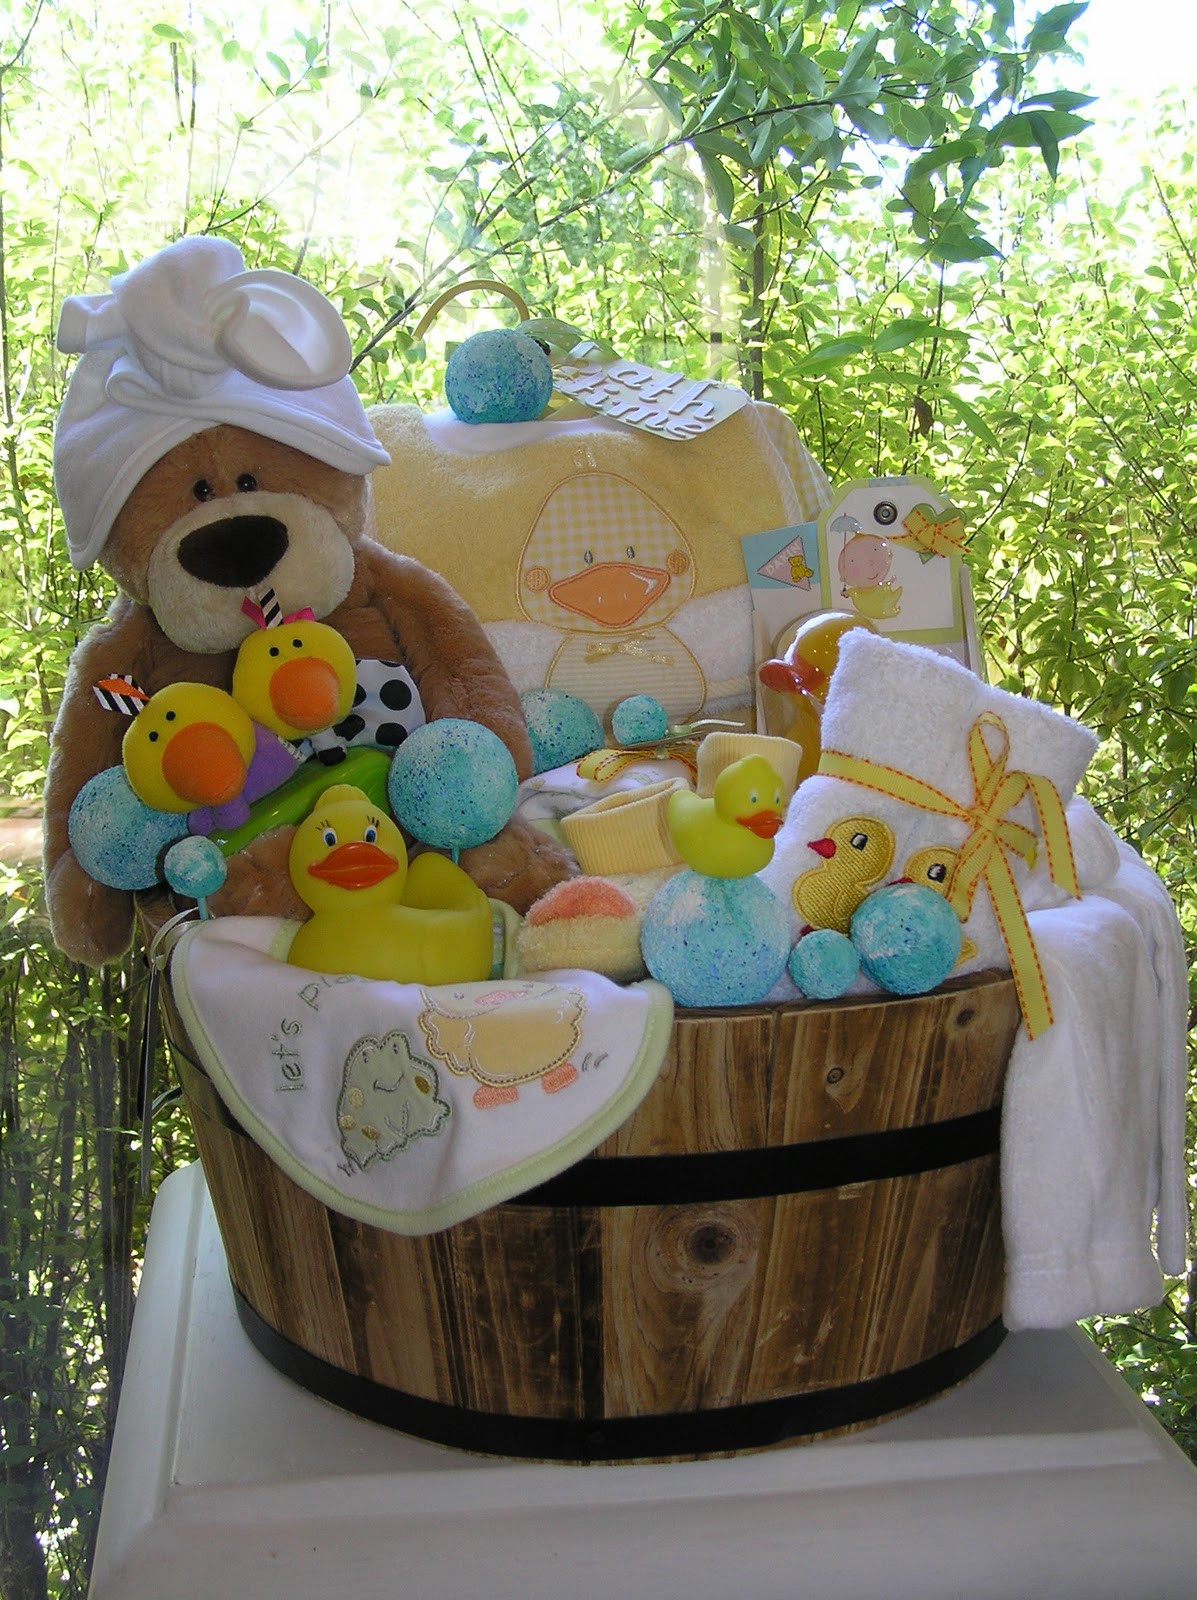 Ideas For Baby Shower Gift Baskets
 White Horse Relics Unique Themed Baby Gift Baskets